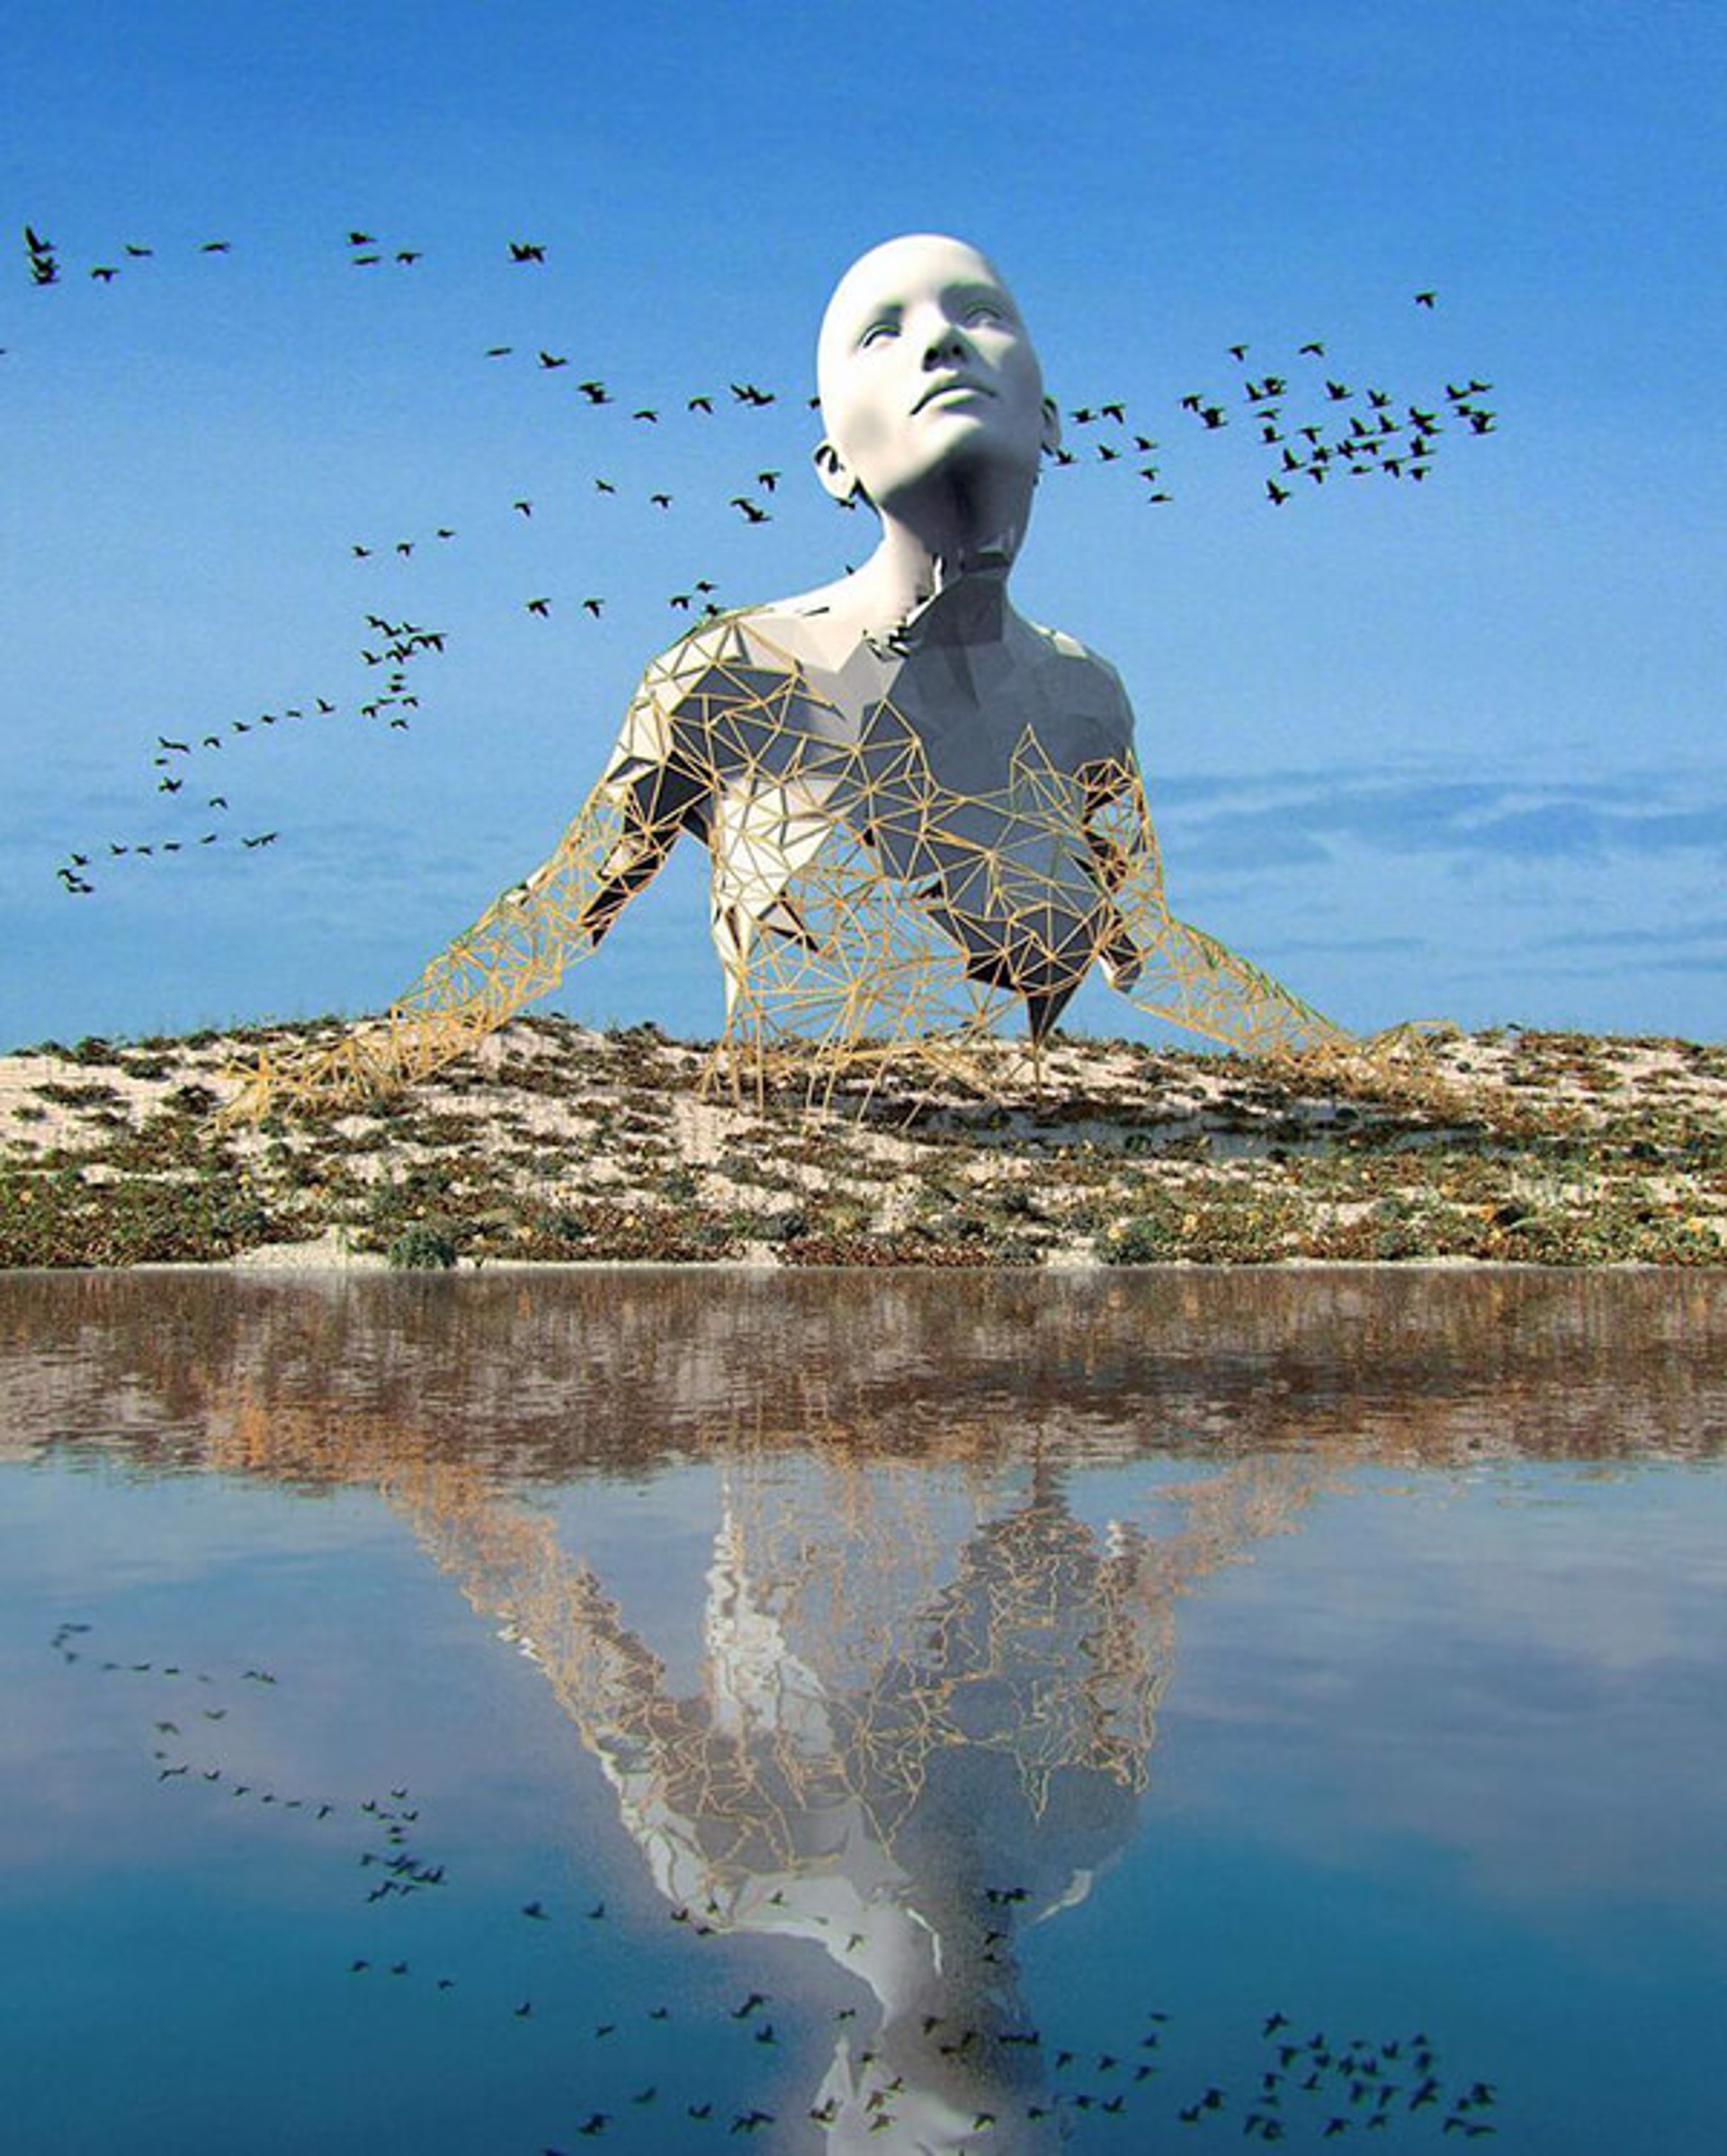 West Release  (other sizes available upon request) by Chad Knight